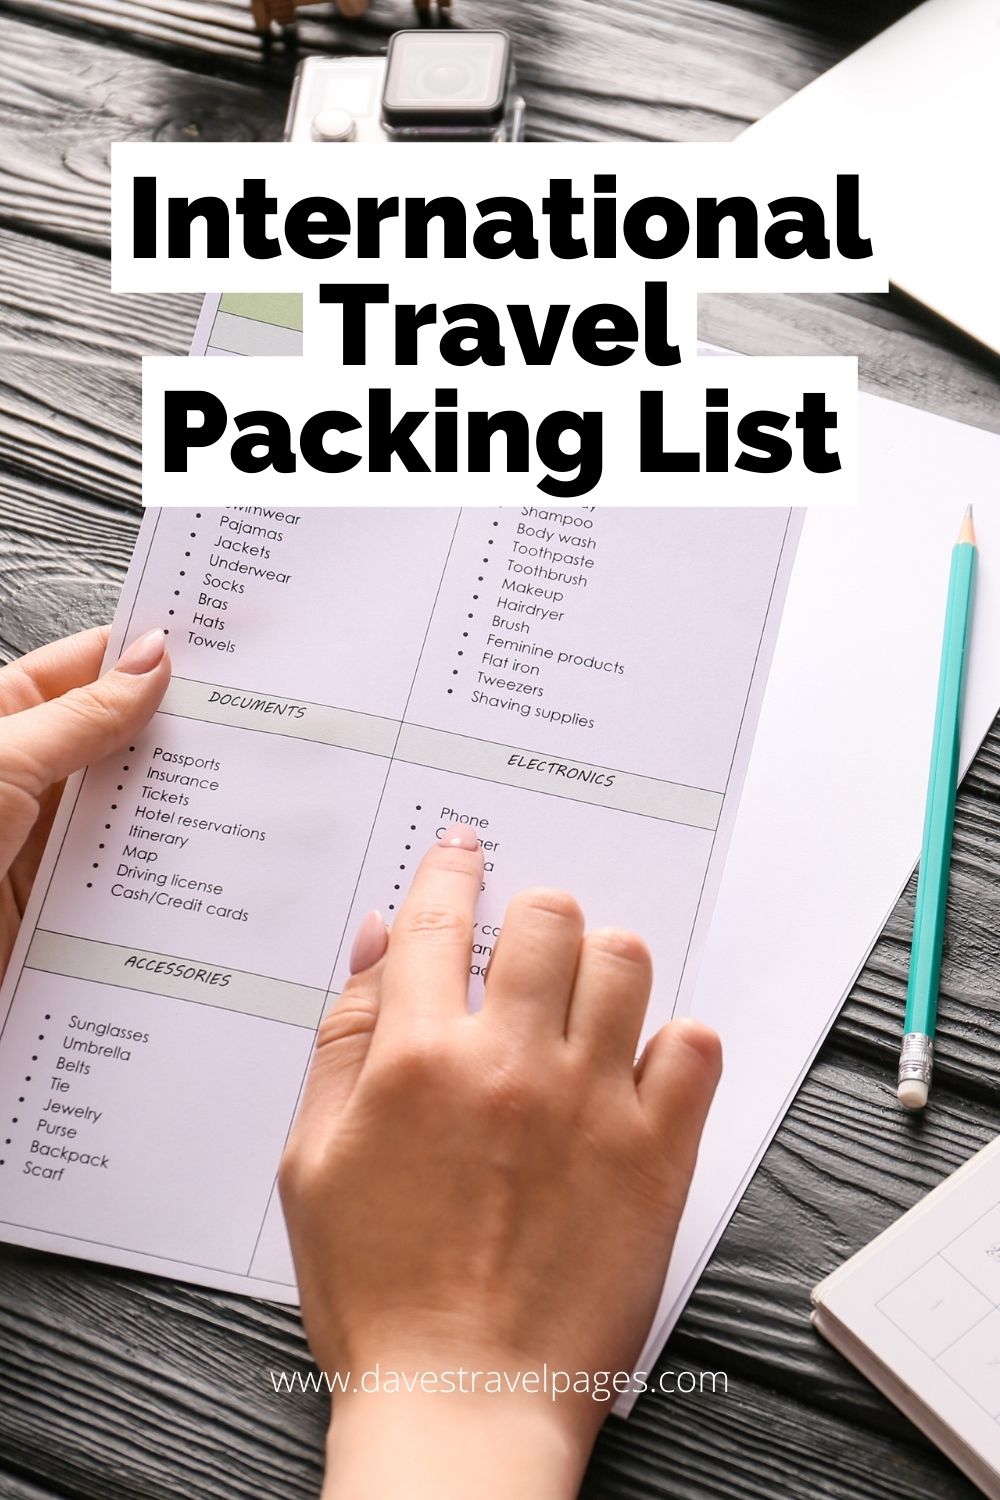 International Travel Packing Checklist The Ultimate Guide!